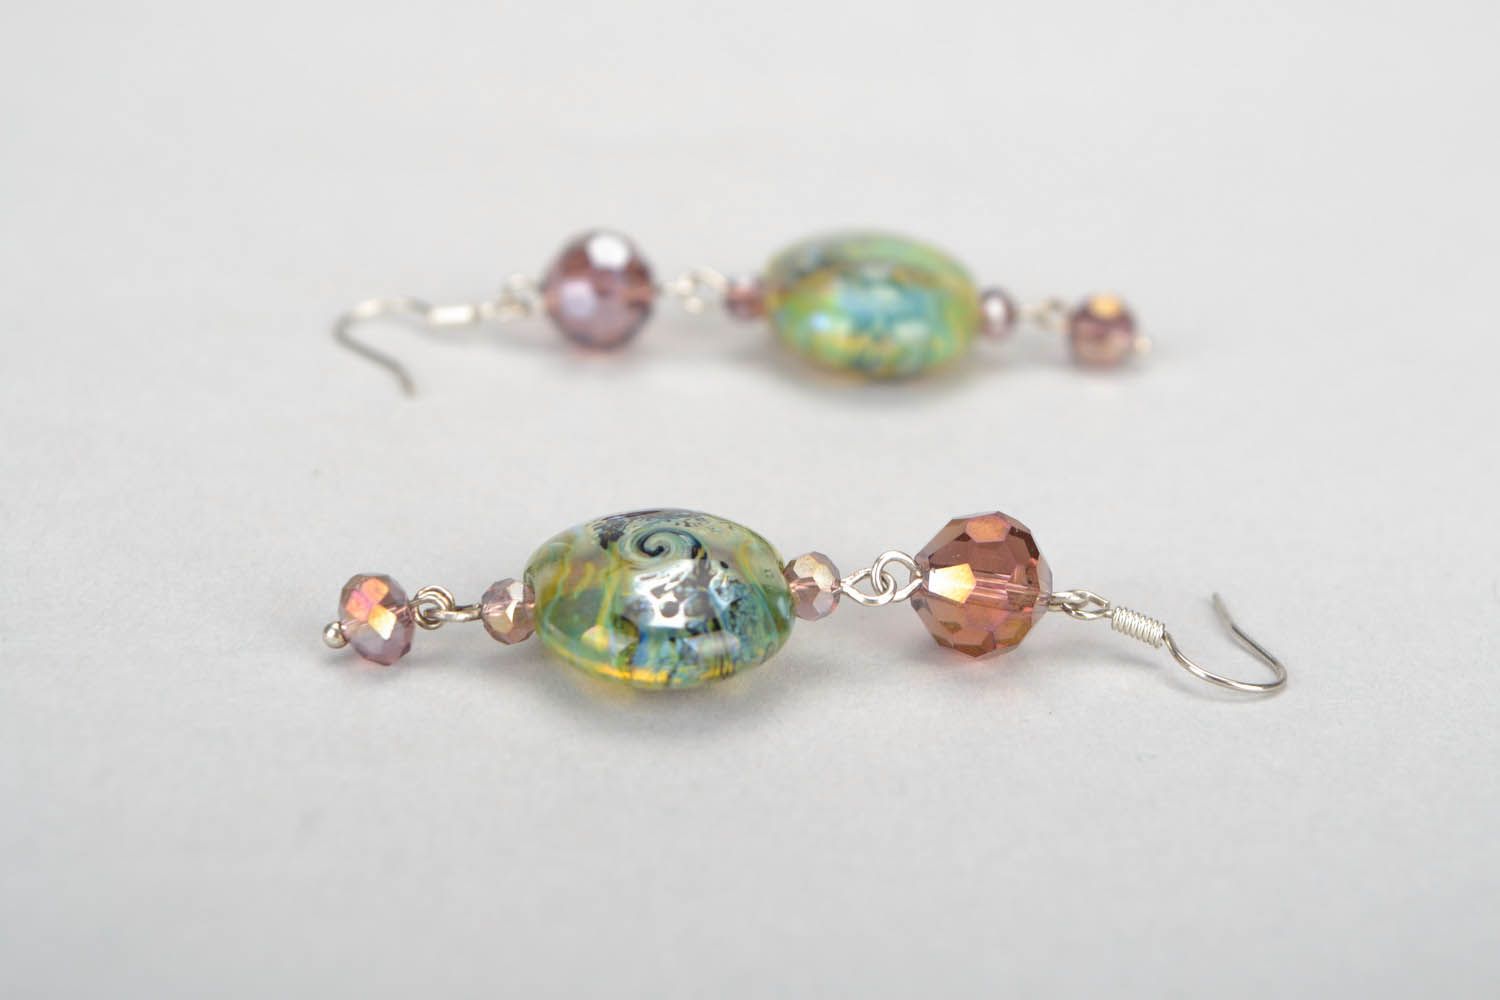 Glass earrings made using lampwork technique photo 4